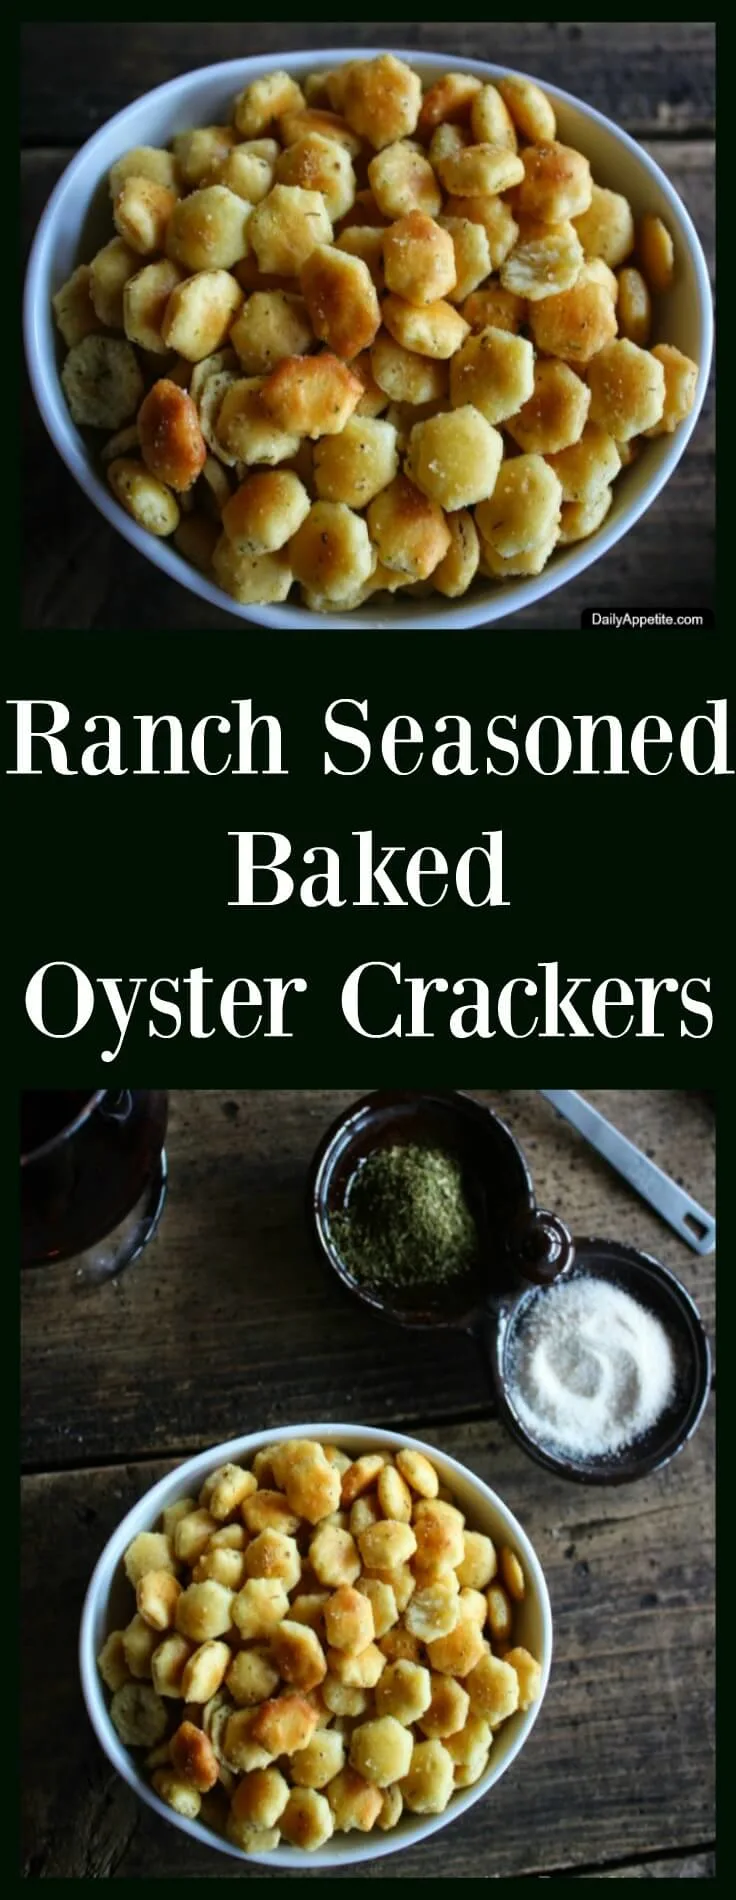 Ranch Seasoned Baked Oyster Crackers